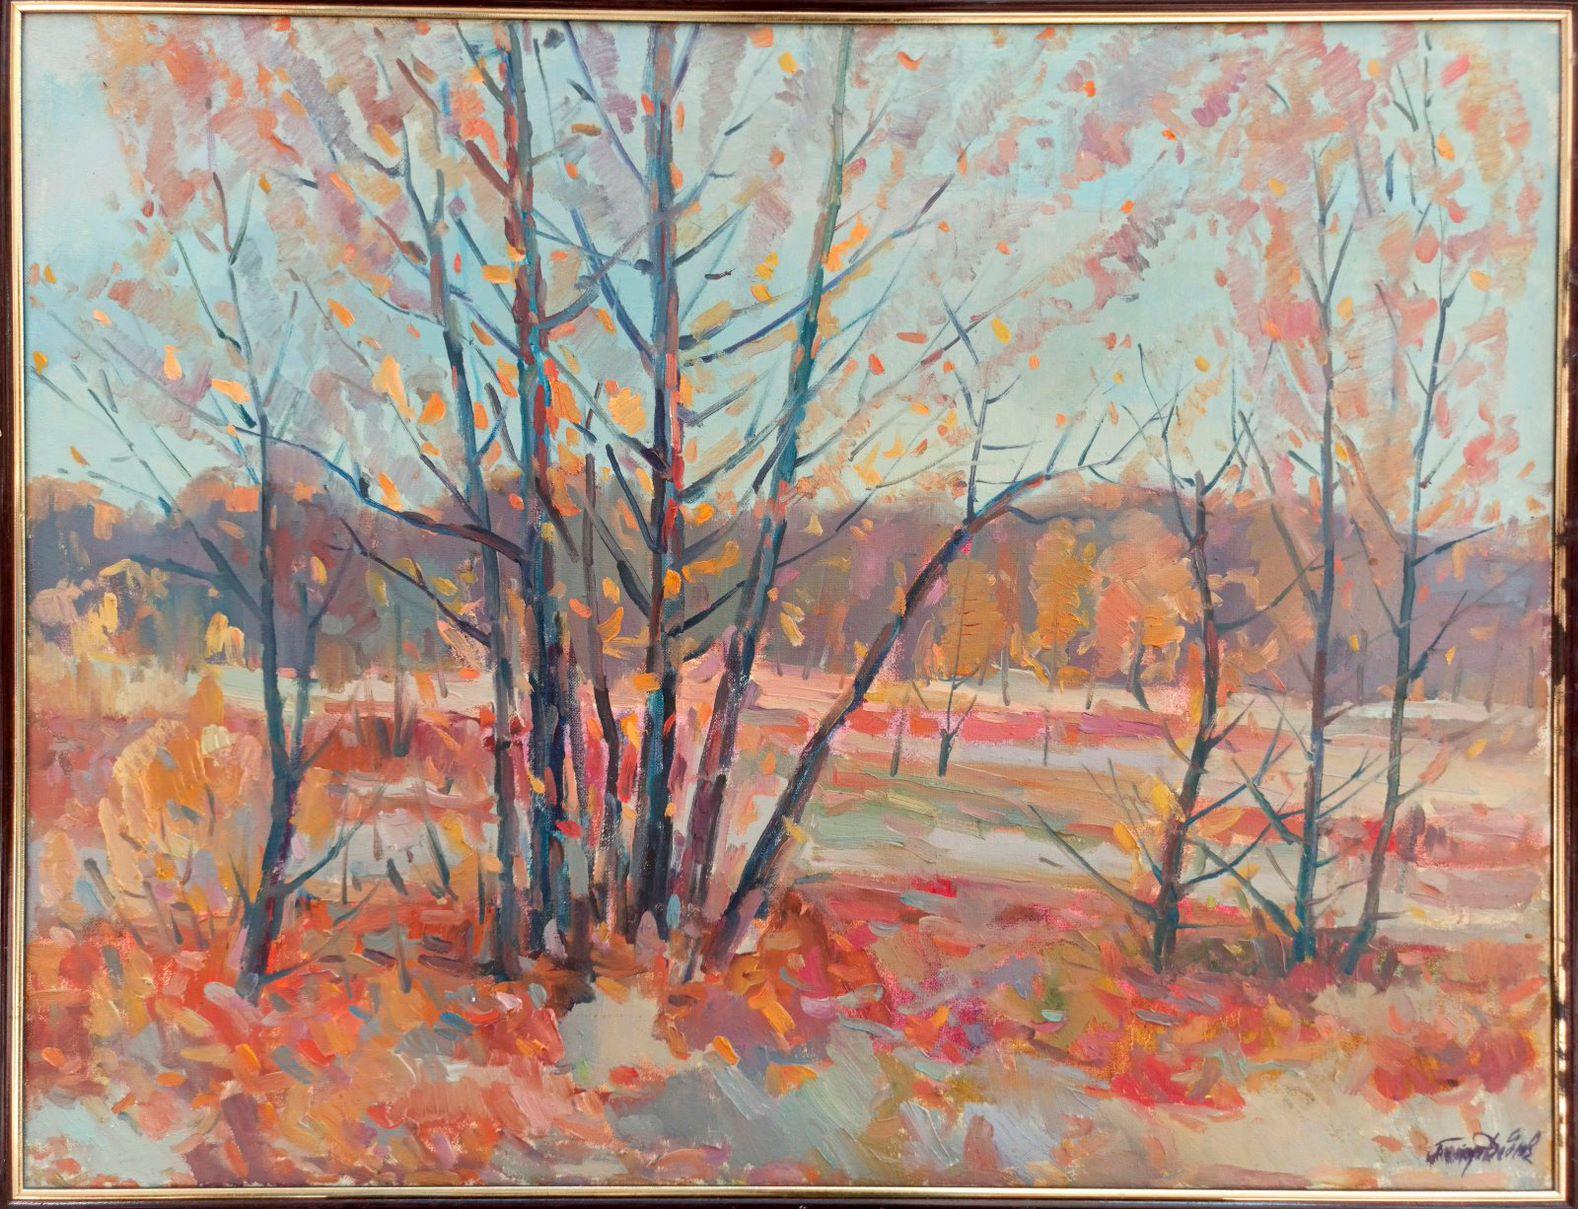 Forest Landscape, Trees, Original oil Painting, Ready to Hang